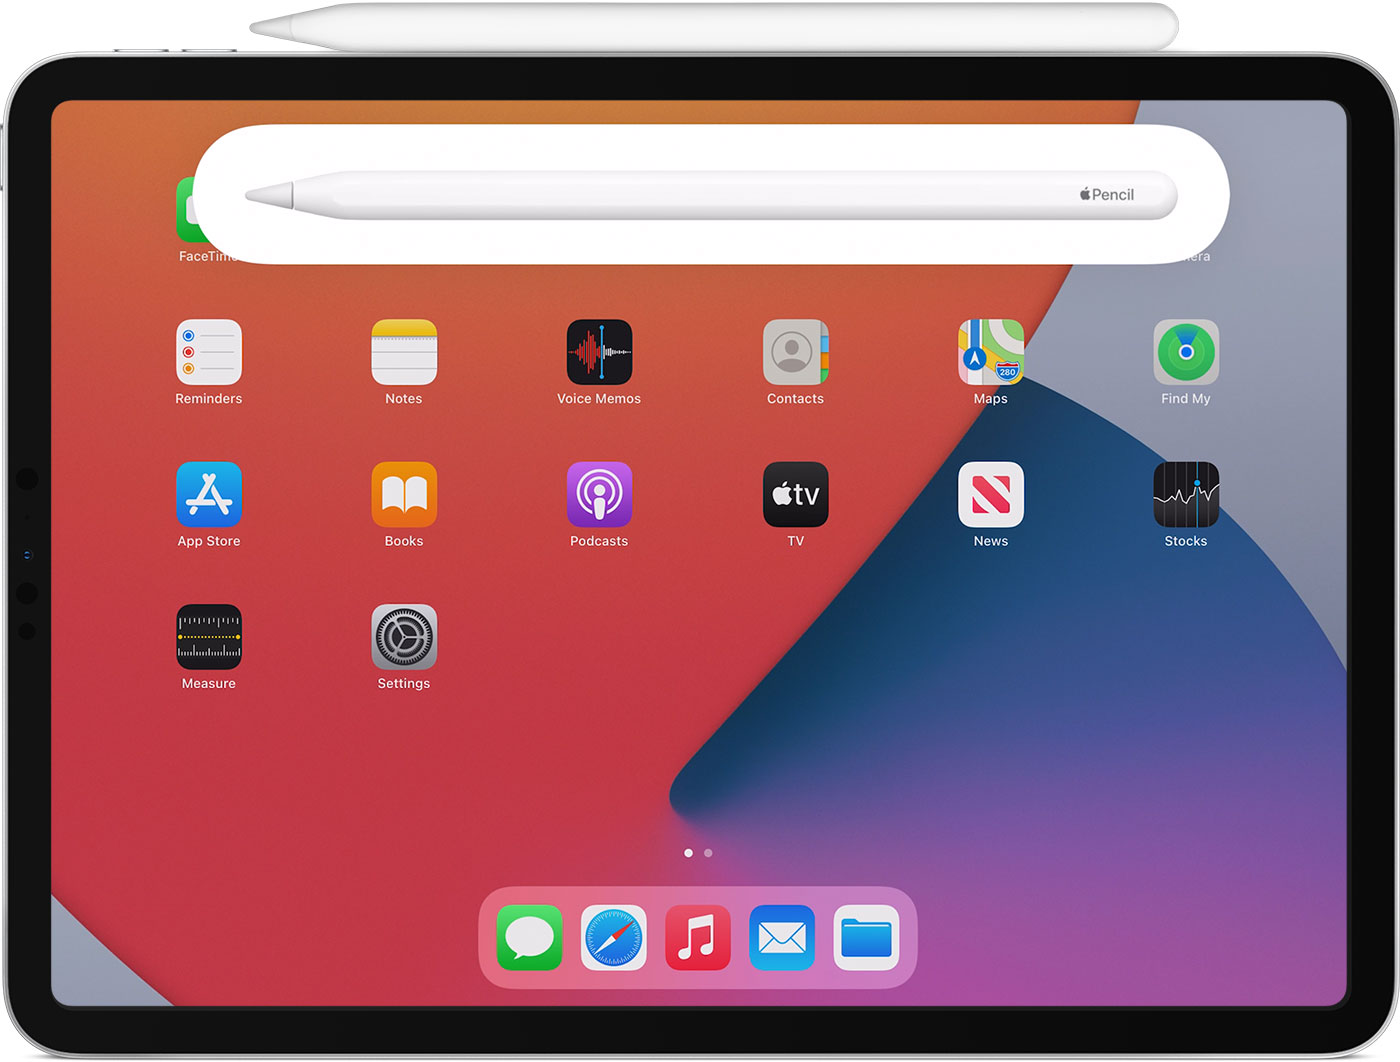 Should I turn off my Apple Pencil when not in use?